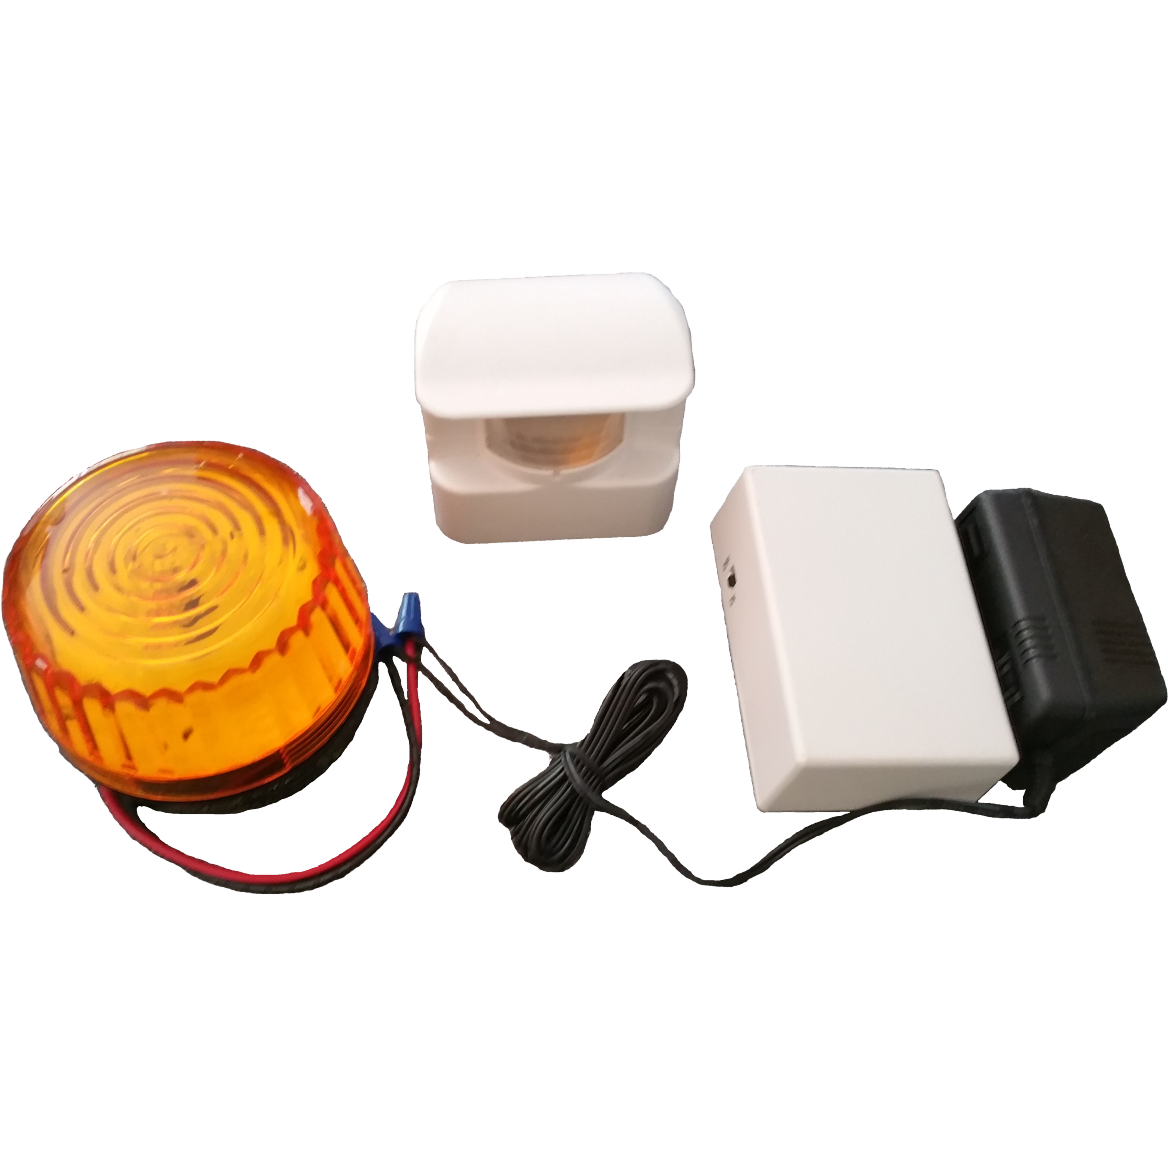 Motion activated sensor with remote strobe ( HS3605) RC 24 - Reliable Chimes